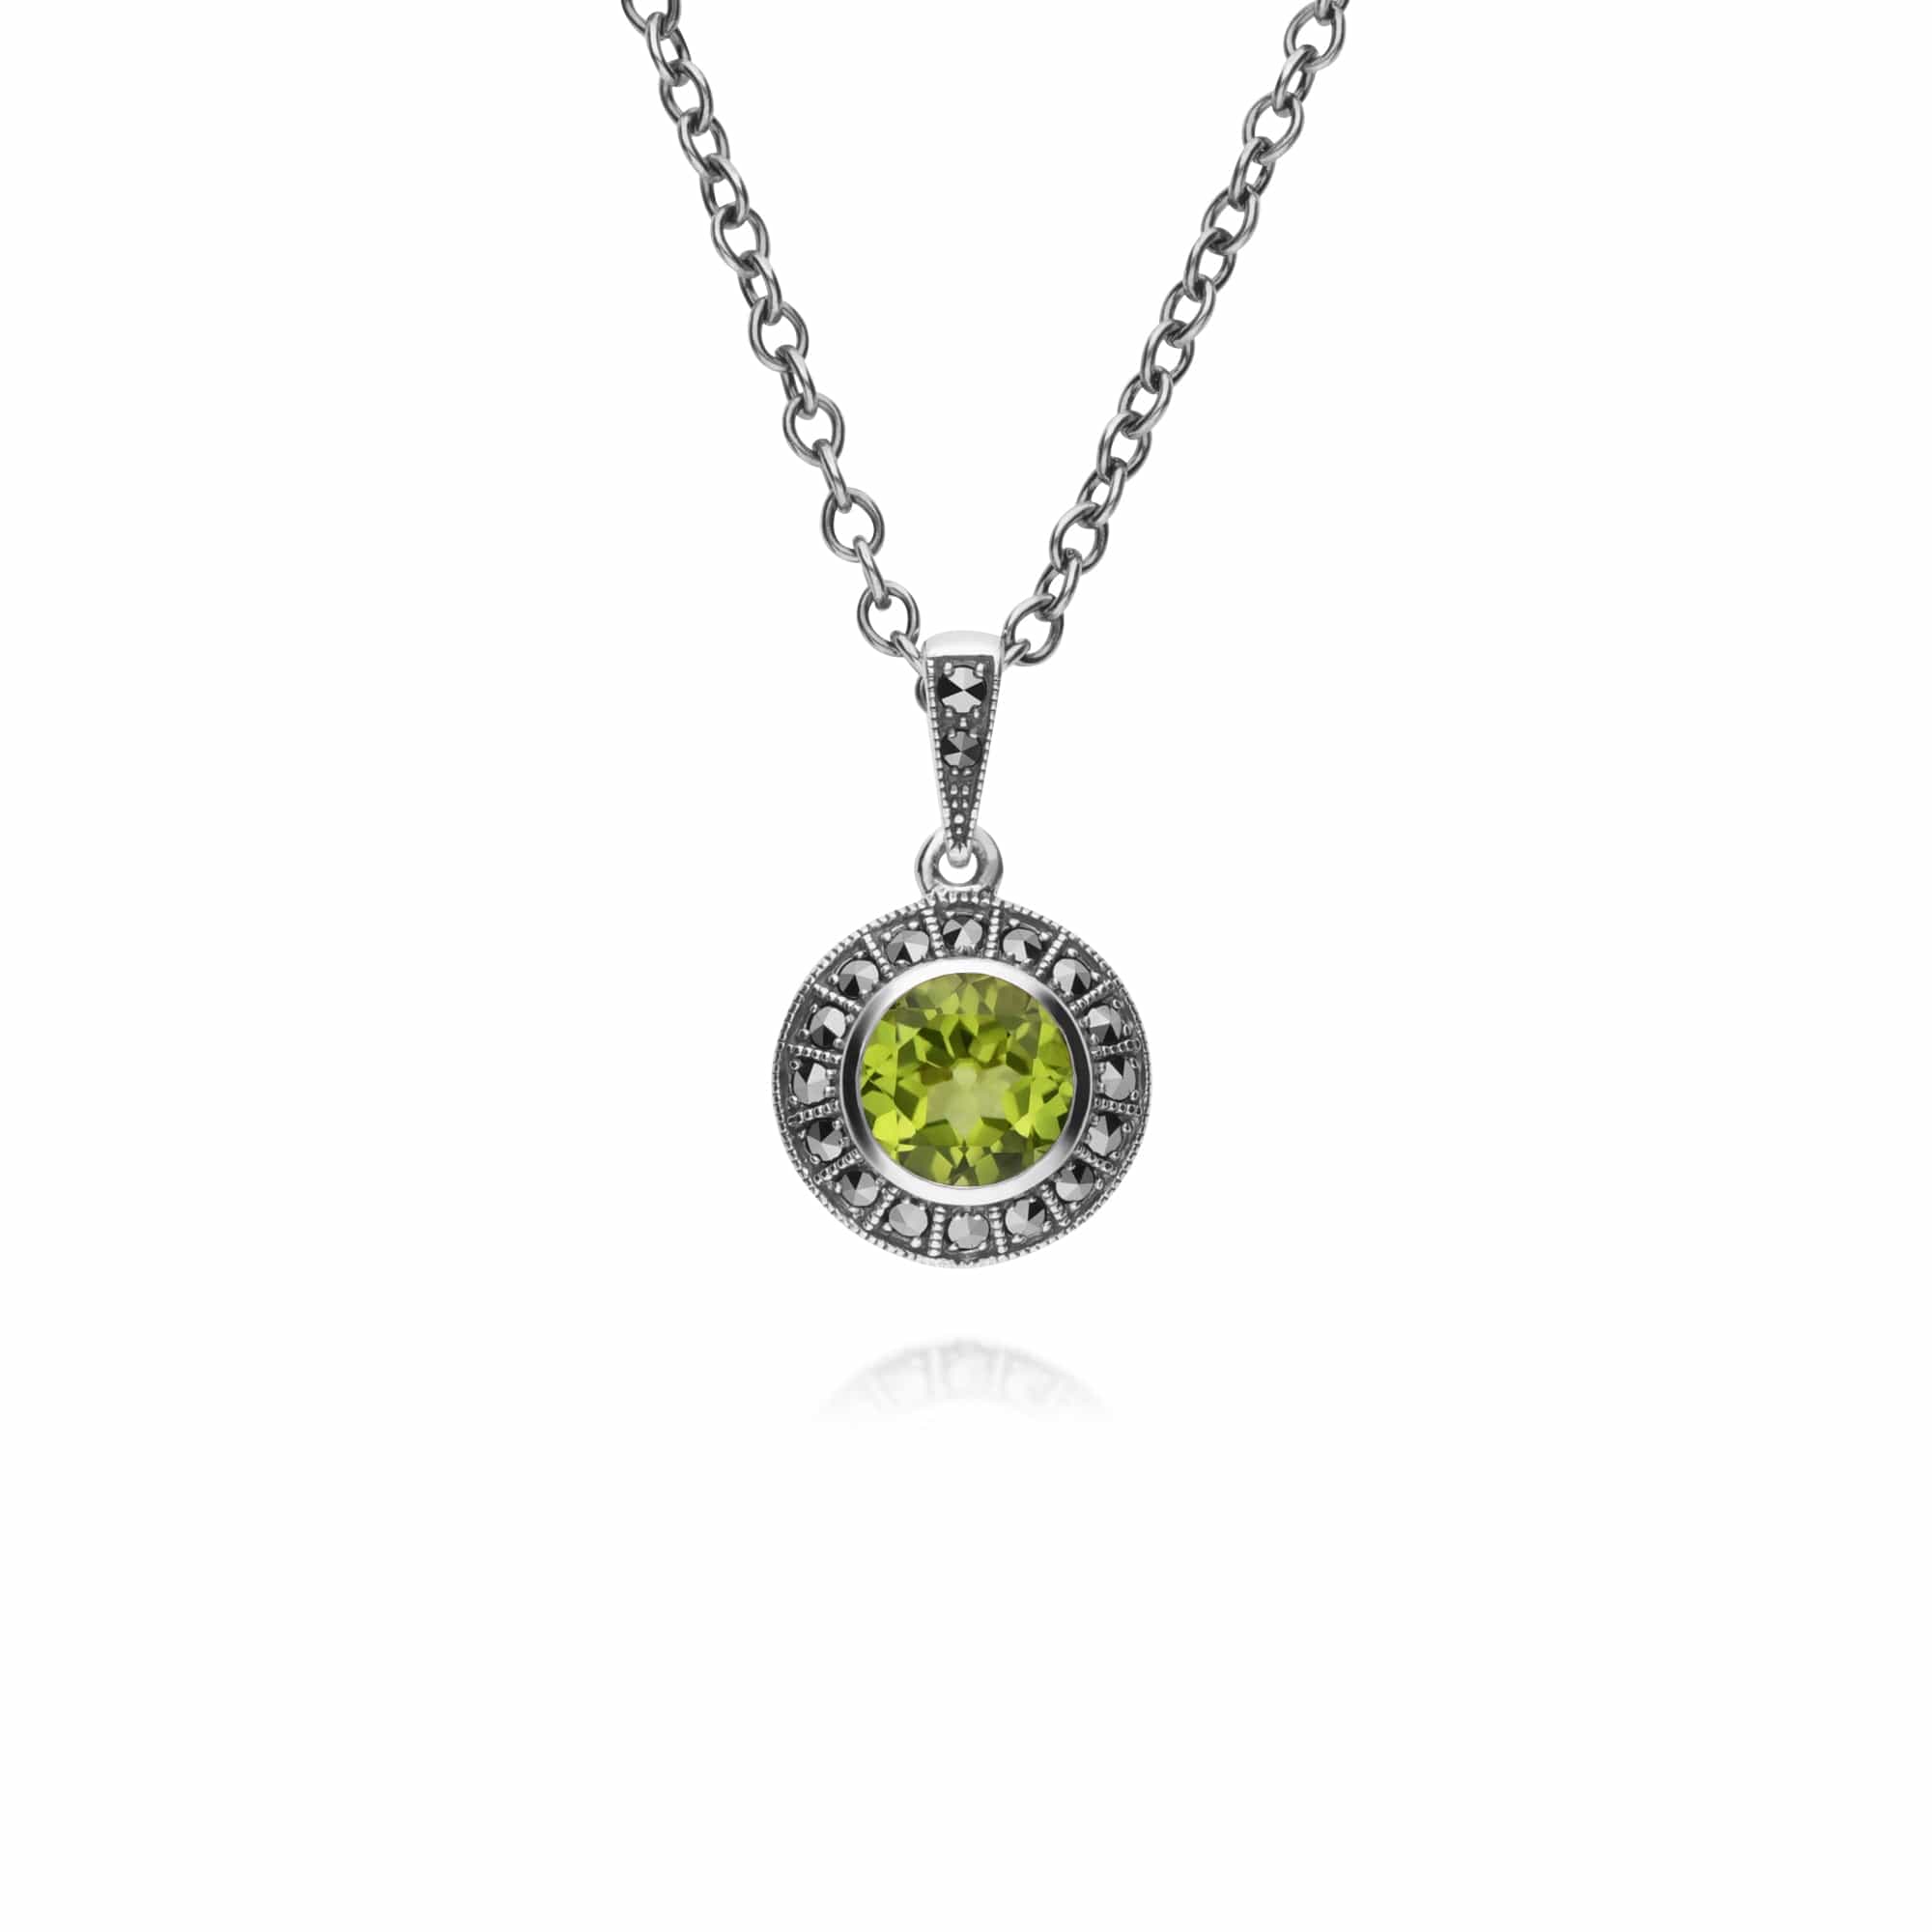 214E872704925-214N707304925 Art Deco Style Round Peridot and Marcasite Cluster Stud Earrings & Pendant Set in 925 Sterling Silver 3